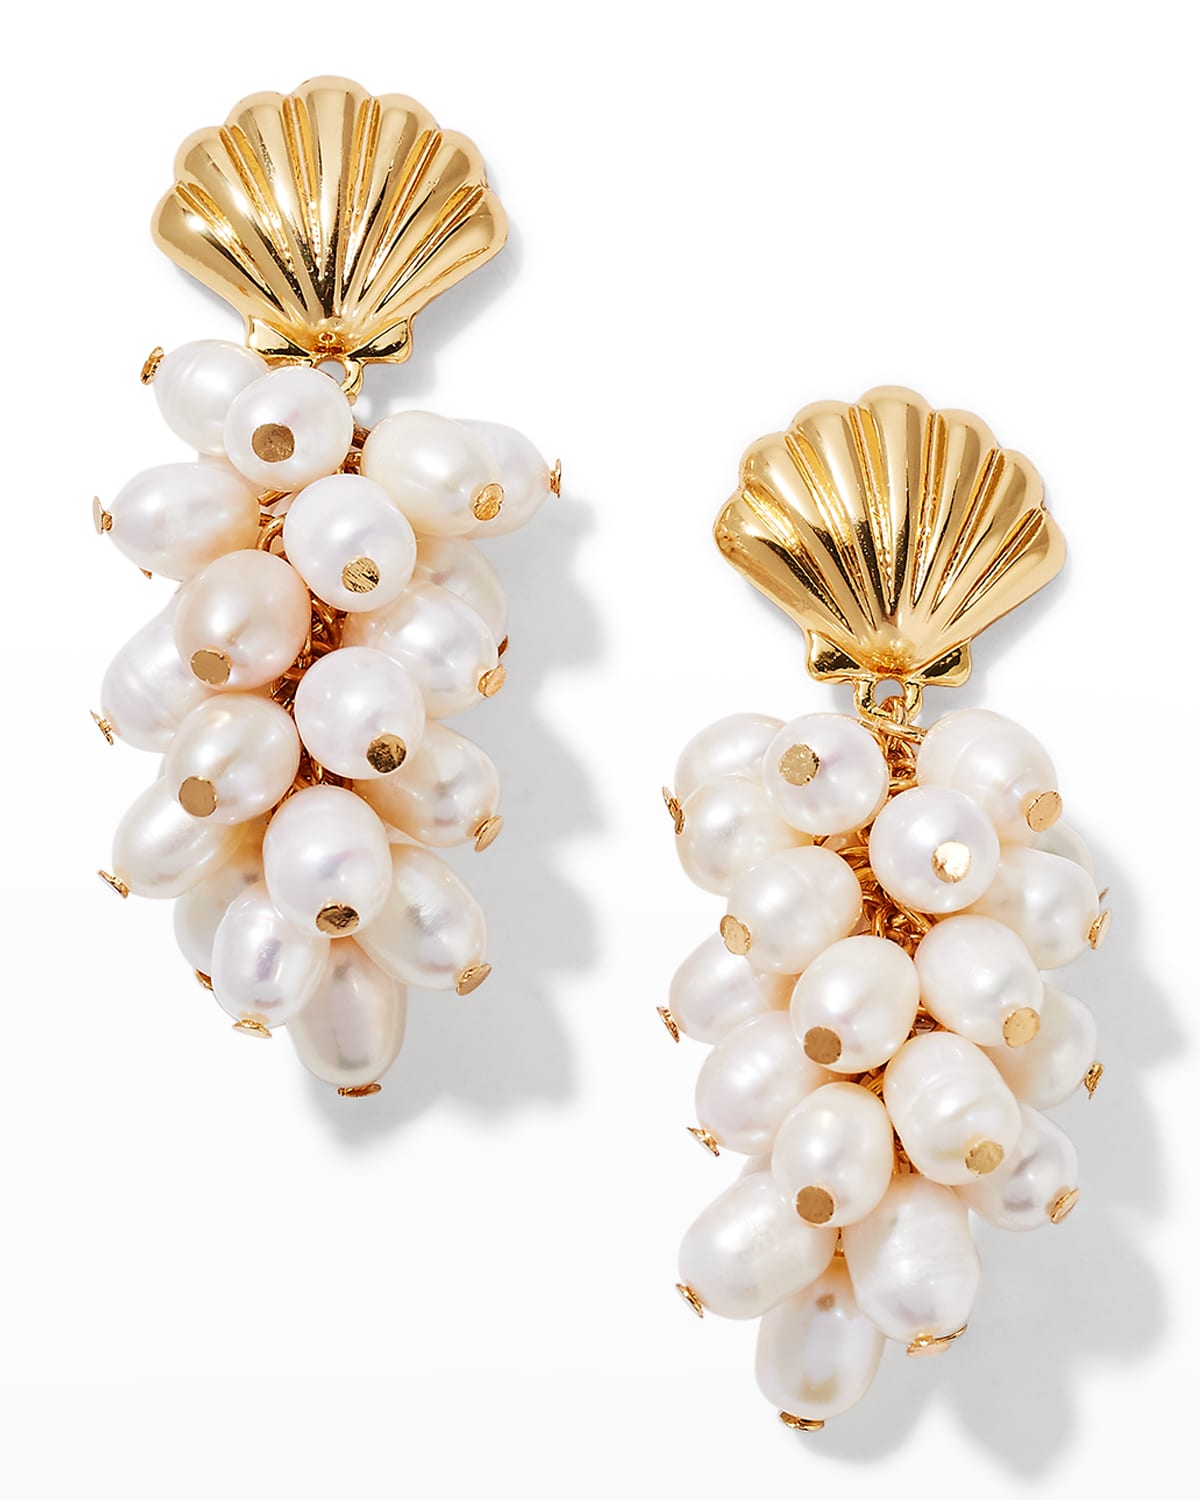 KENNETH JAY LANE PEARLY CLUSTER SHELL EARRINGS